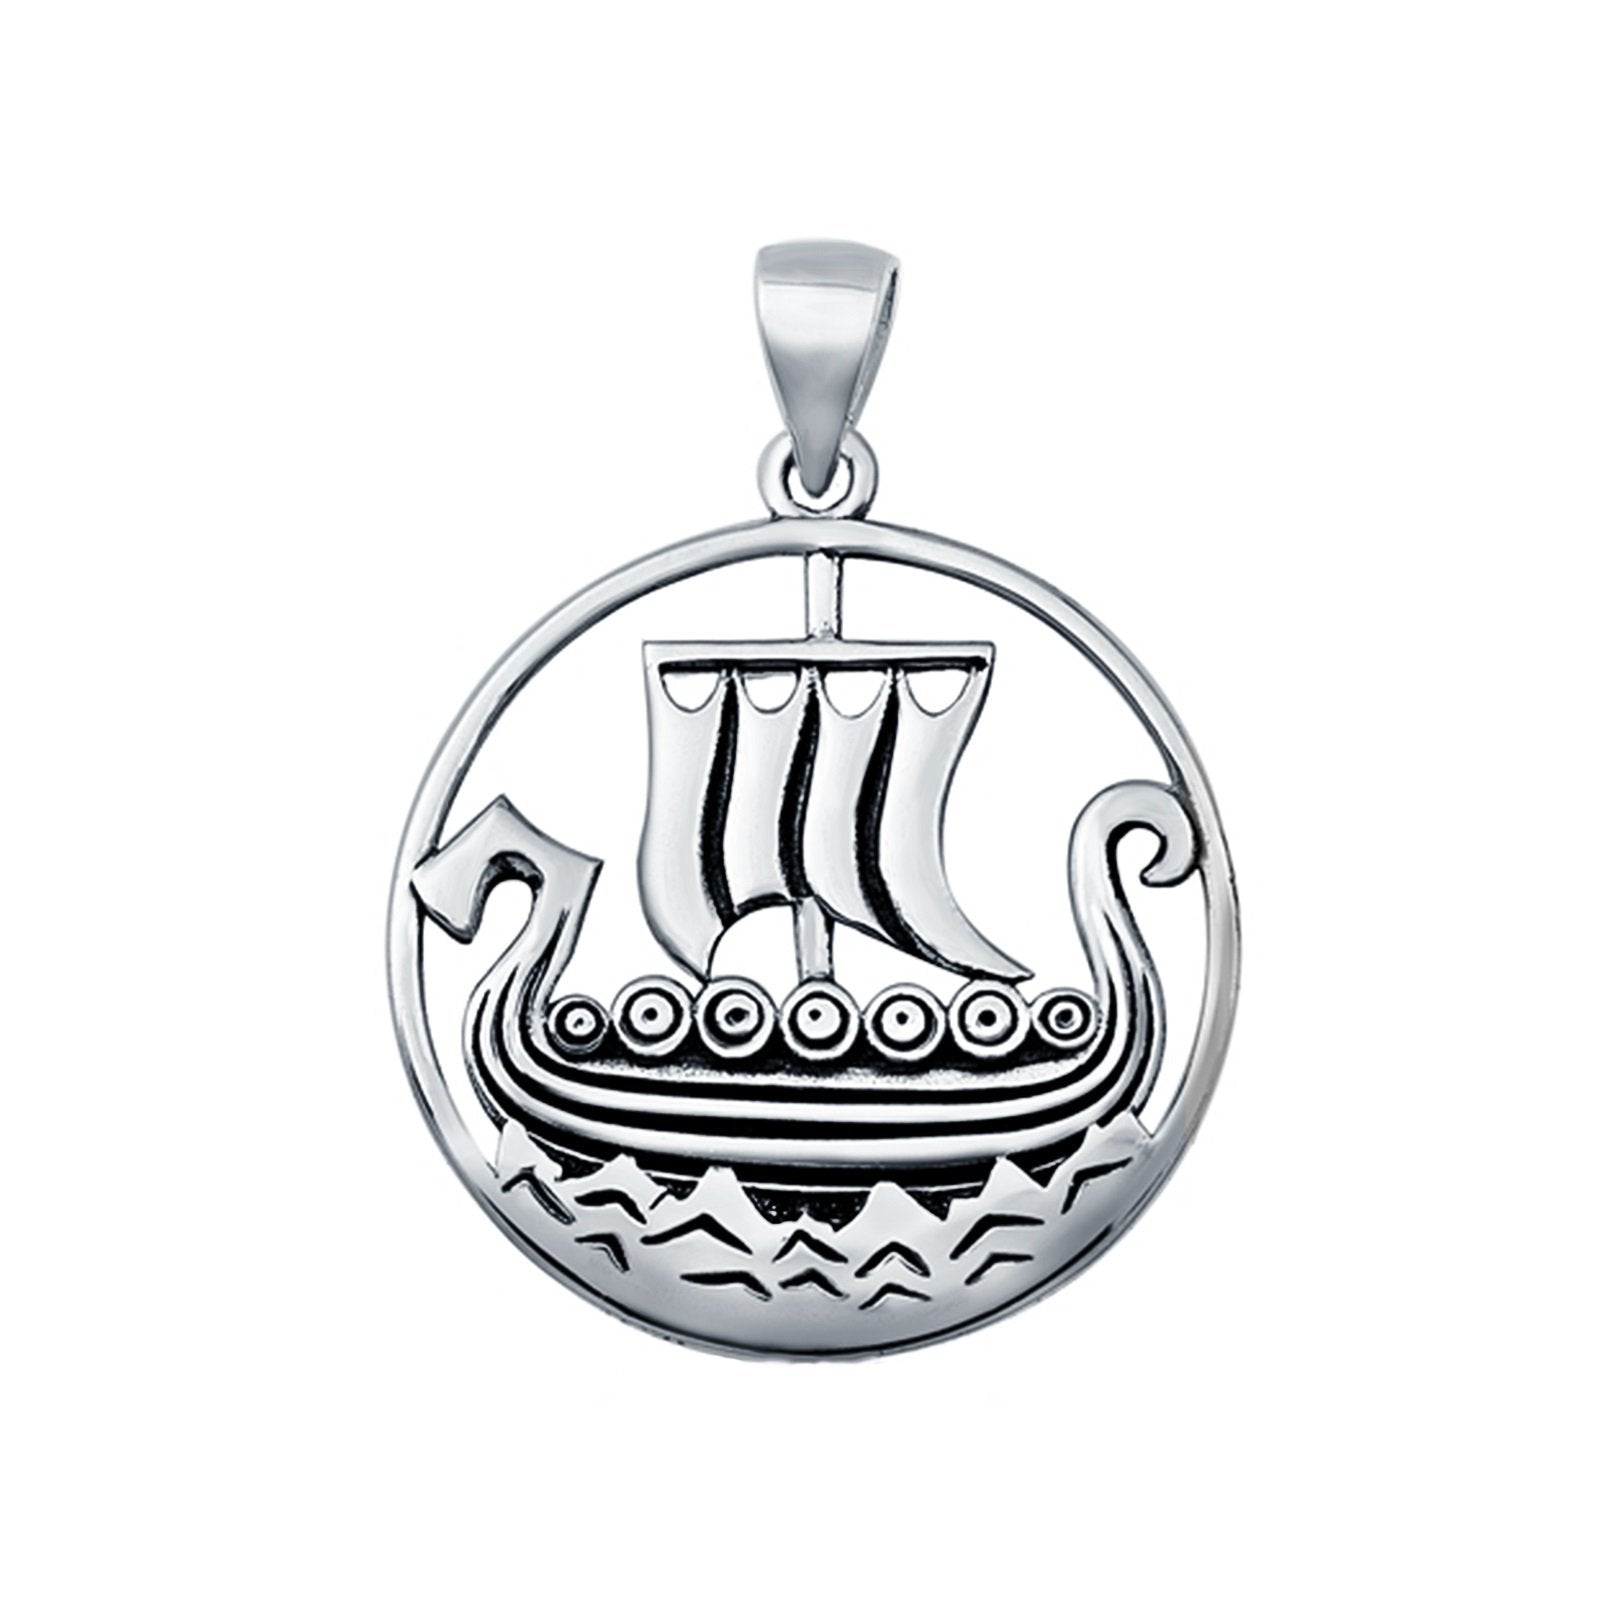 Sailboat Charm Pendant 925 Sterling Silver Fashion Jewelry (24mm)